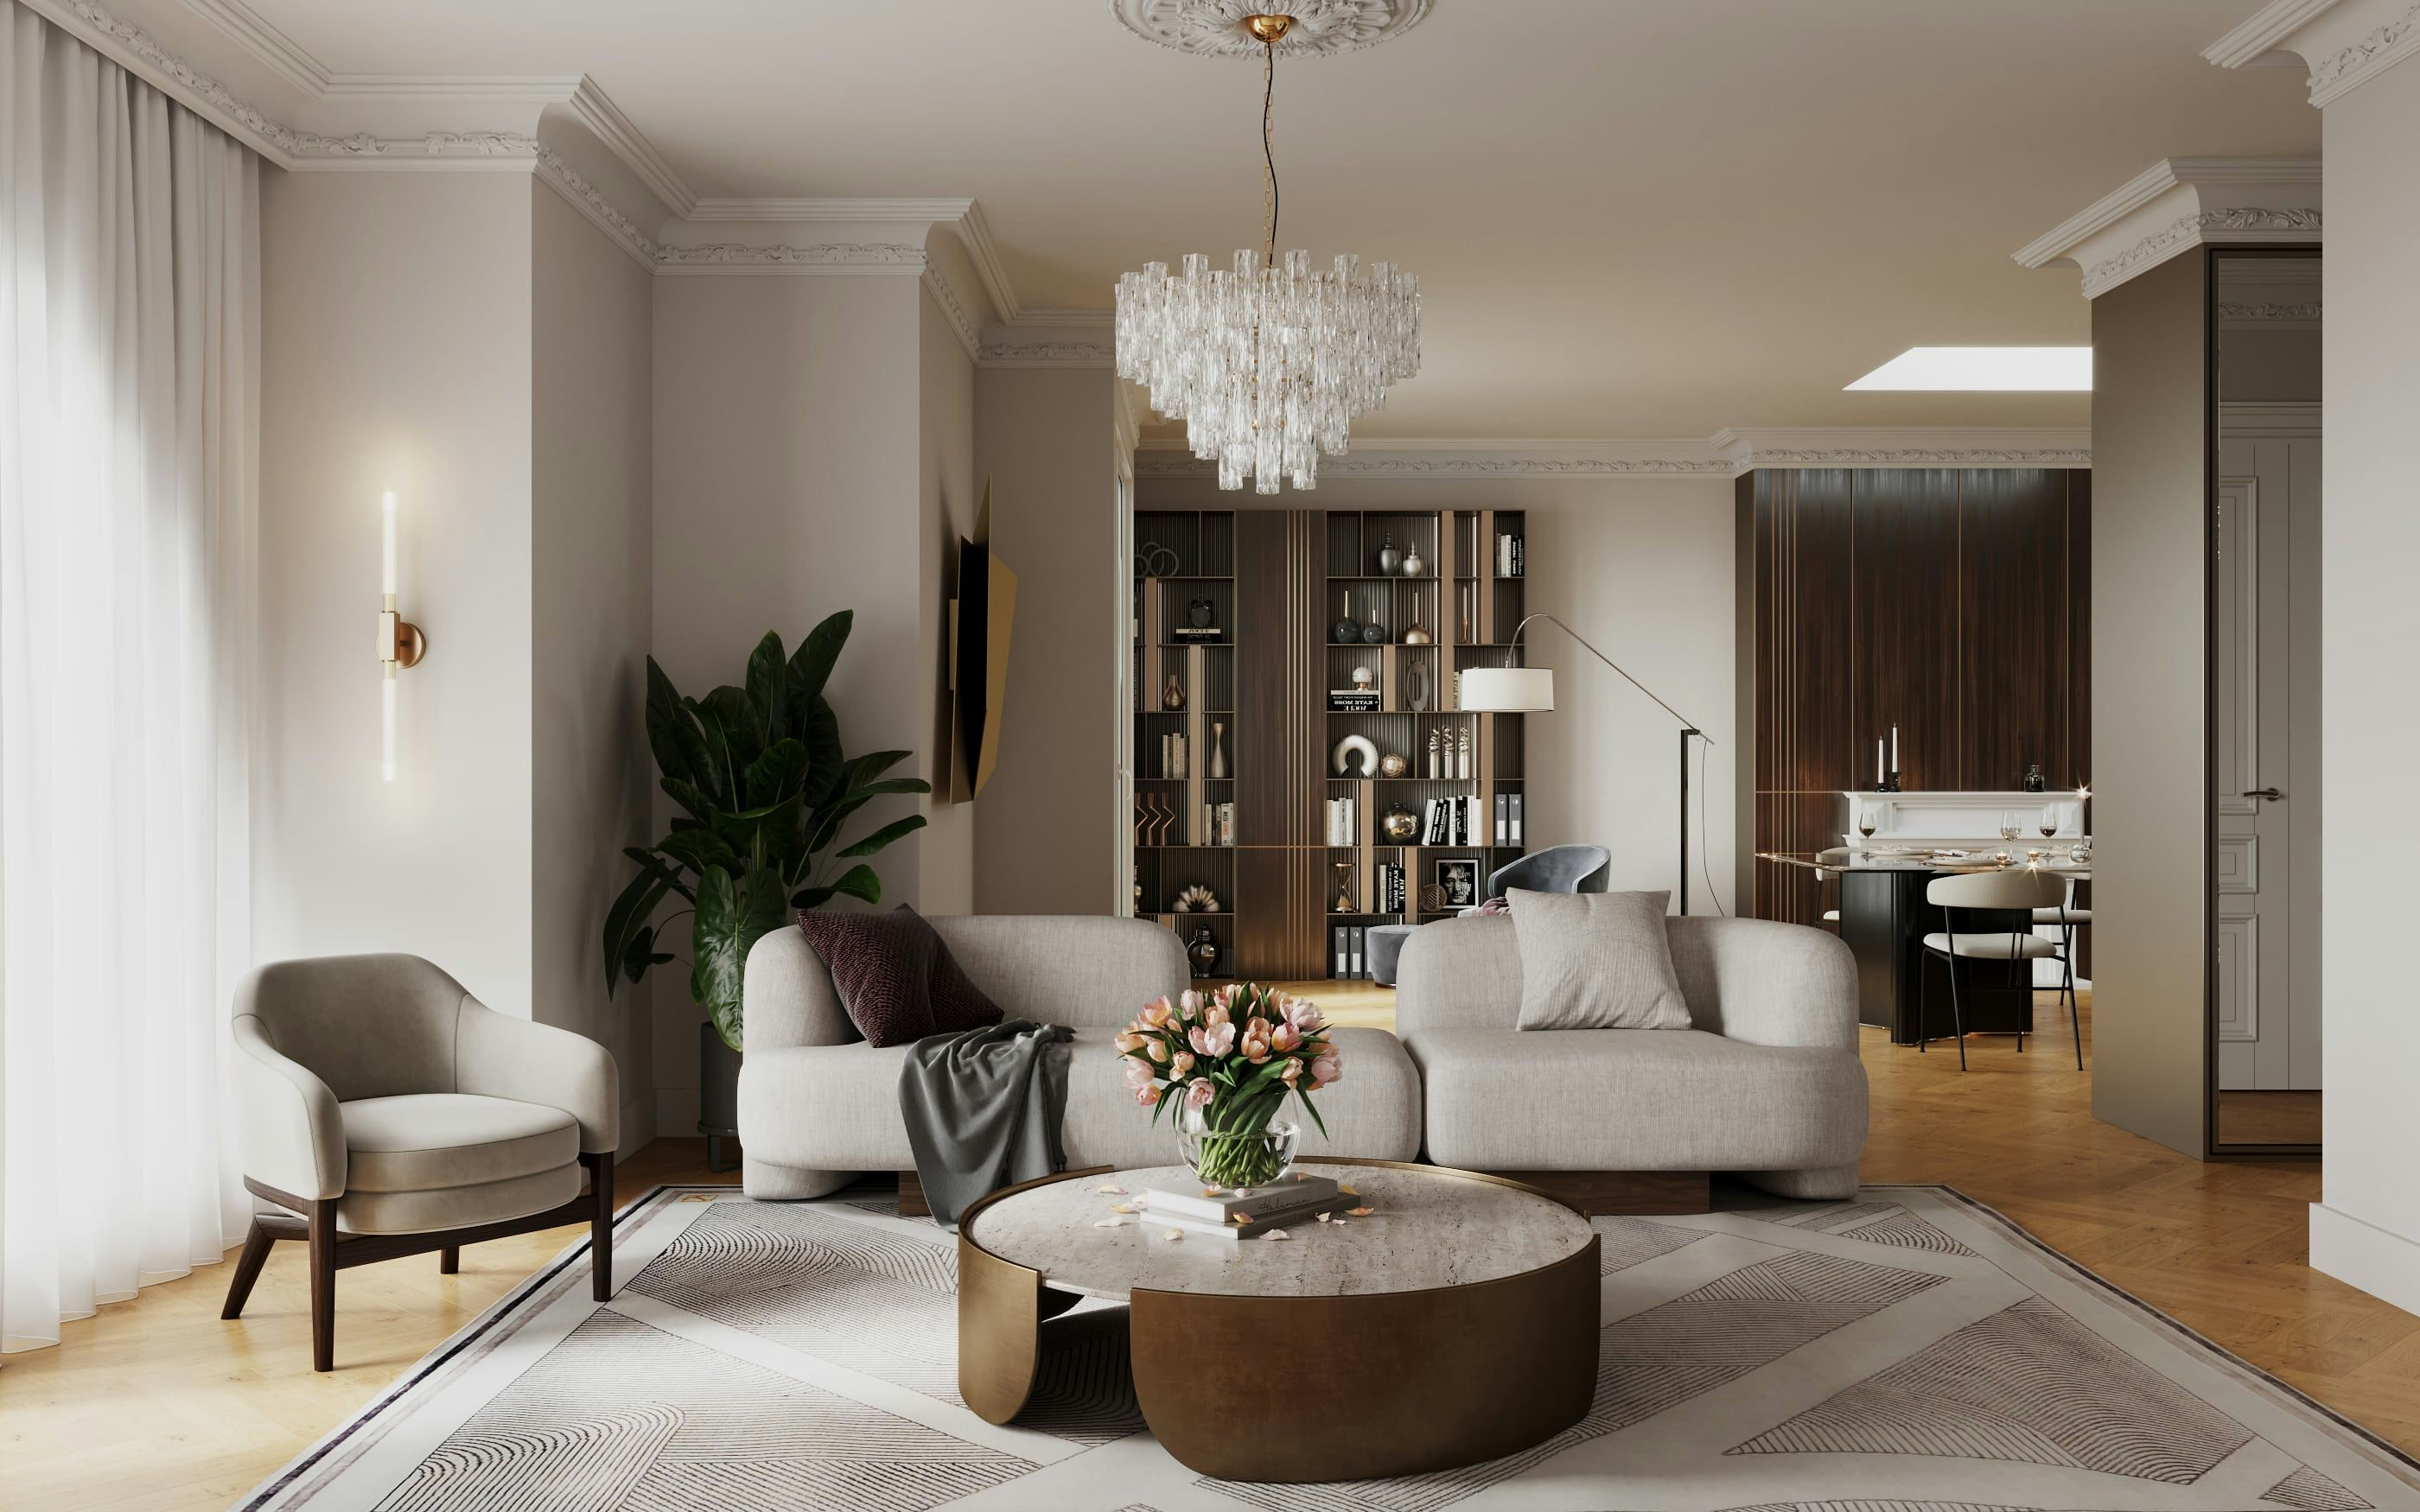 3D Interior Visualization of renovation of living room in old building apartment, Hamburg Germany